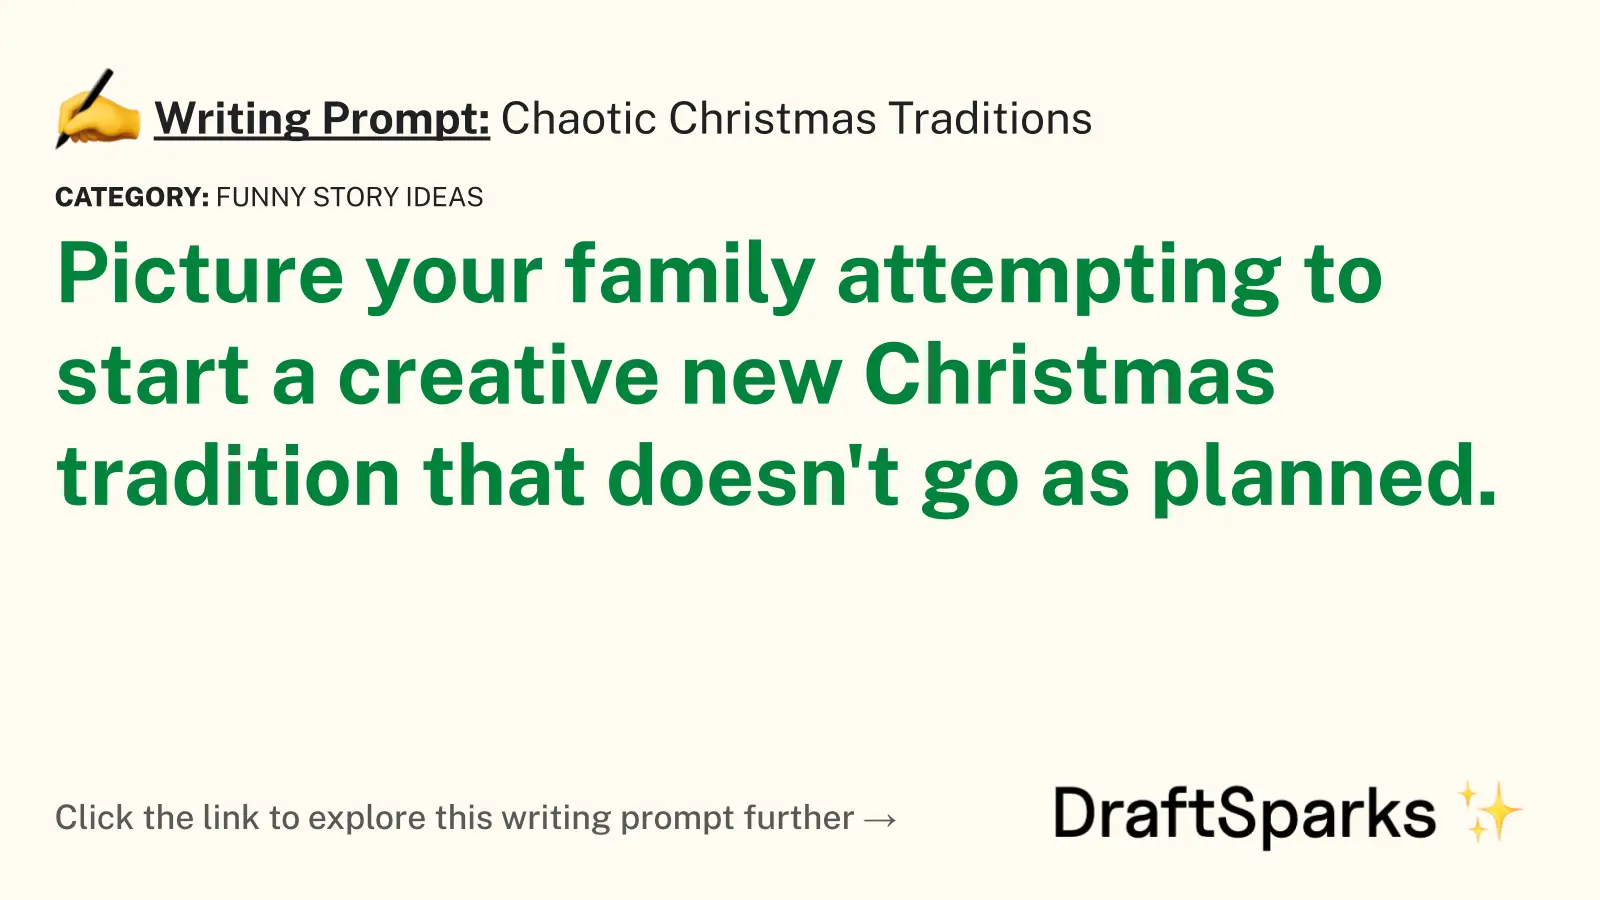 Chaotic Christmas Traditions